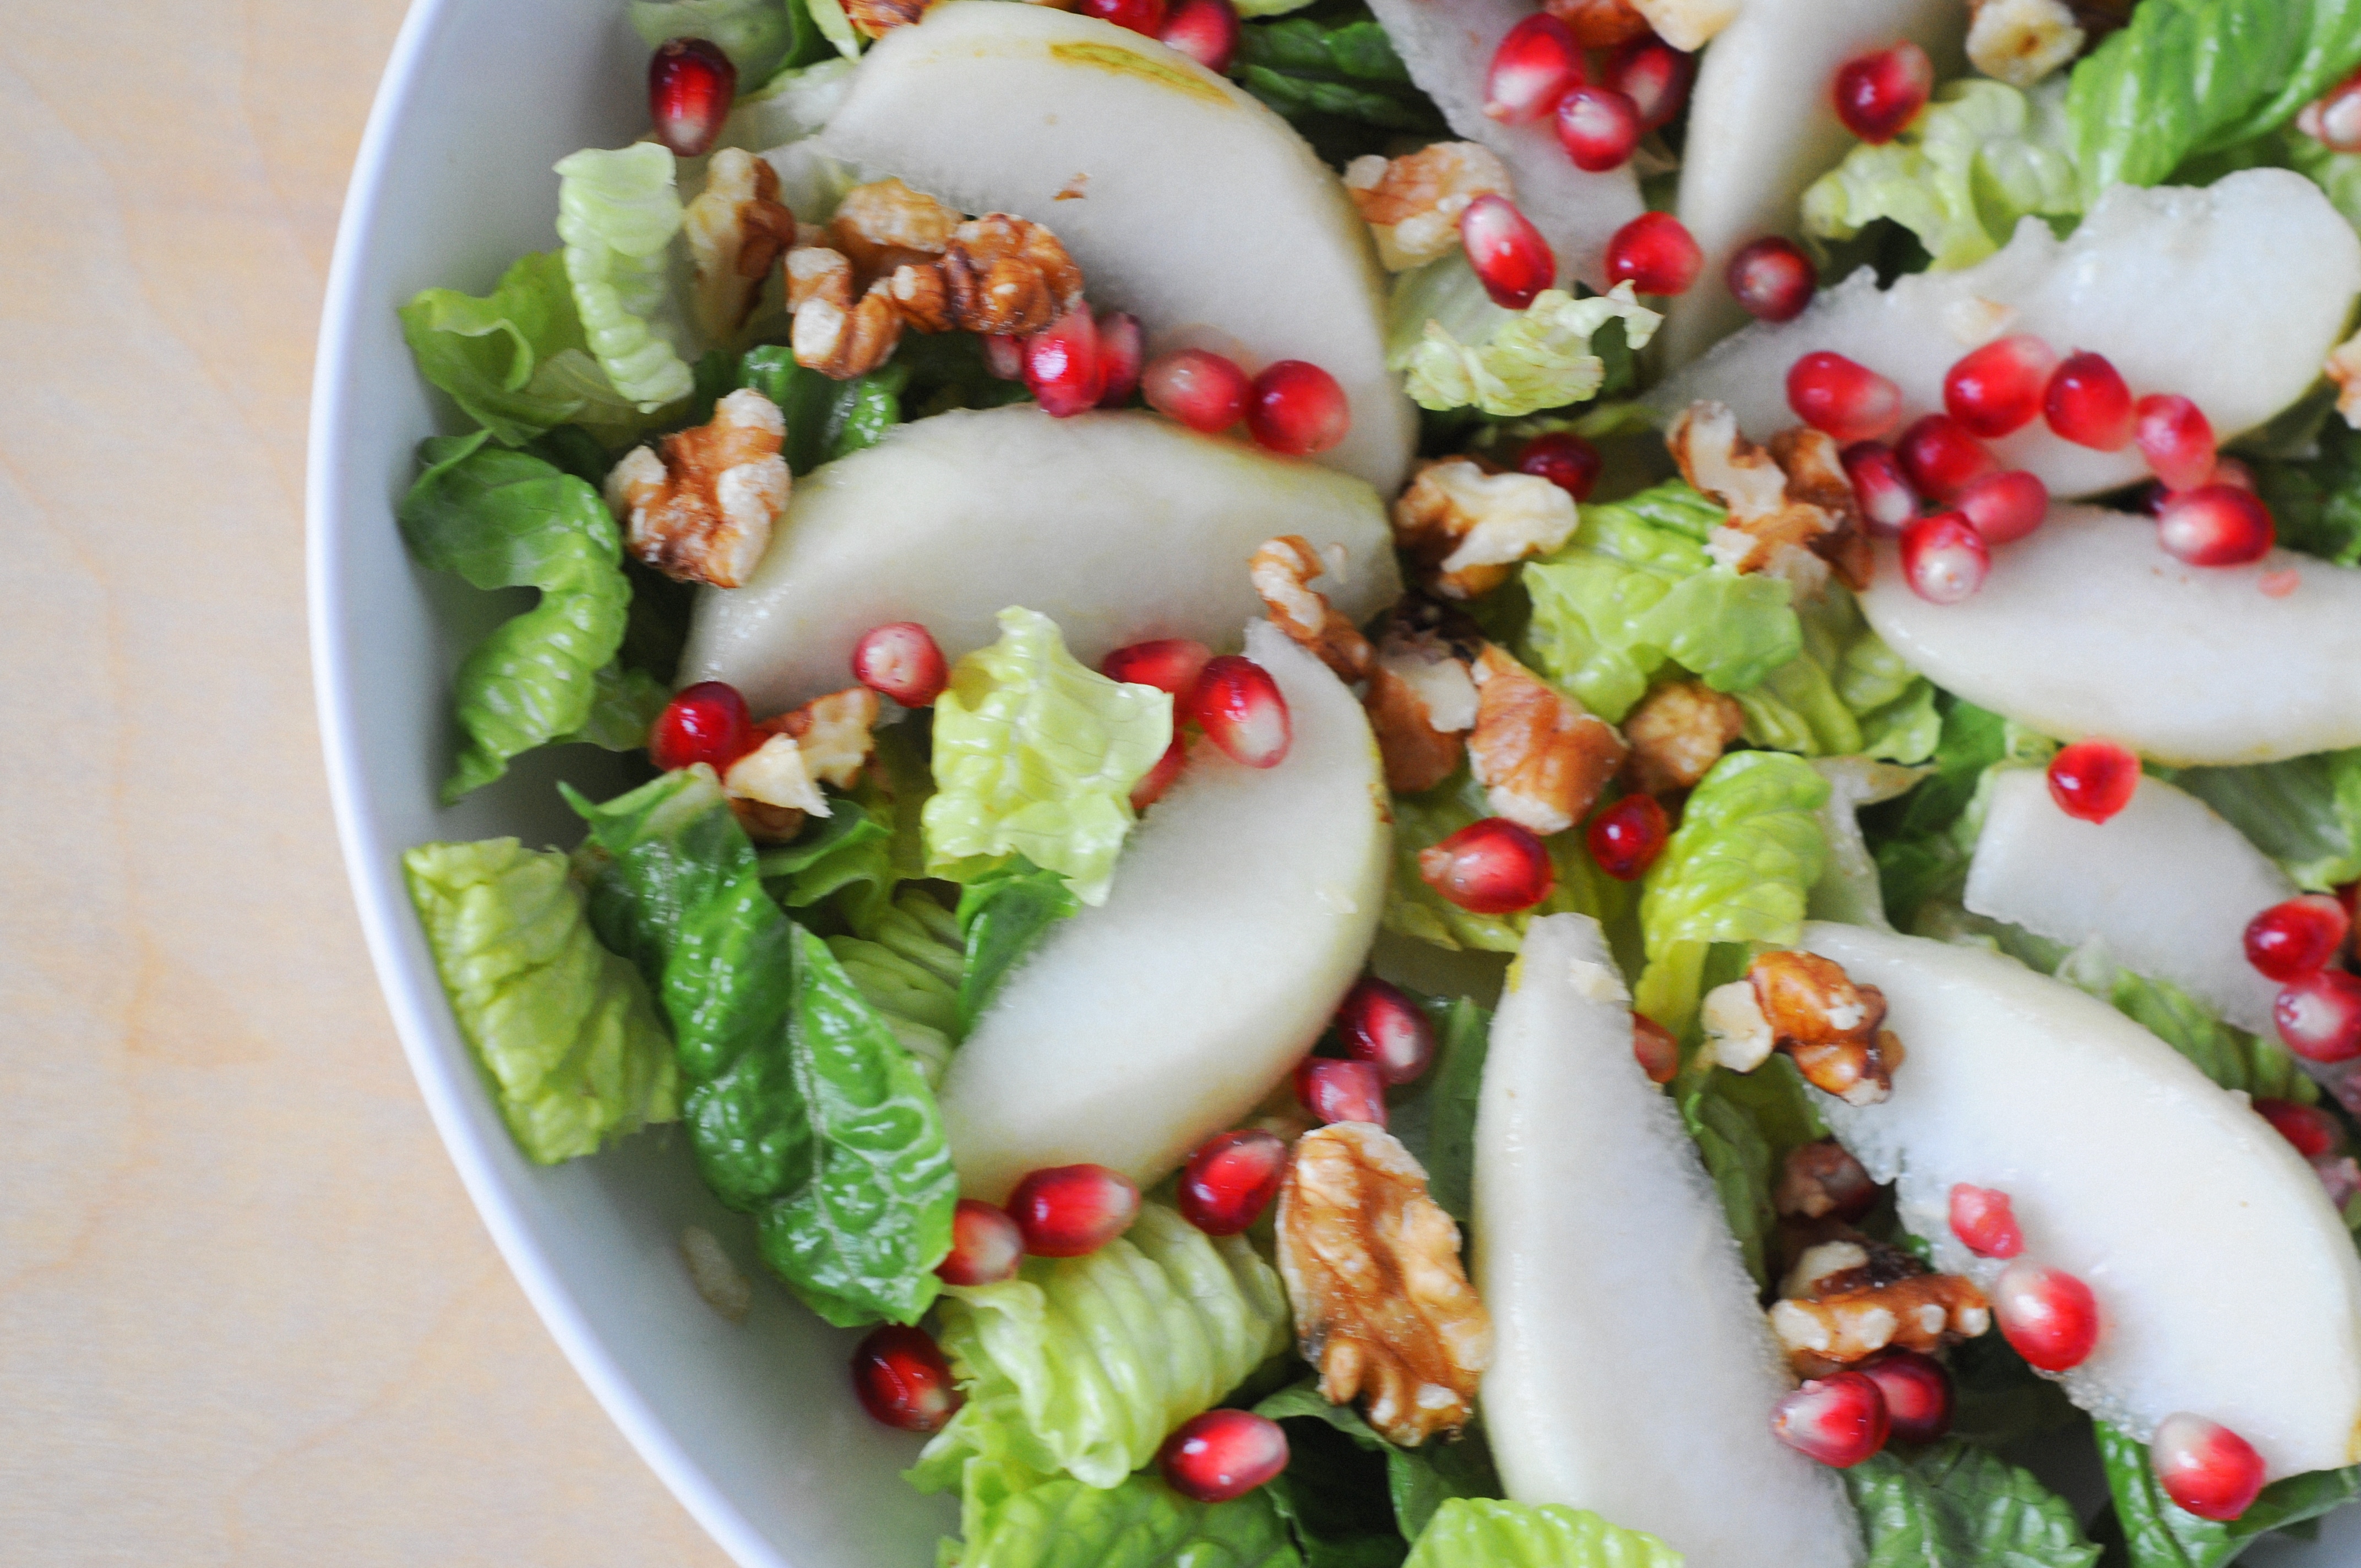 Pear and Pomegranate Salad with Champagne Vinaigrette